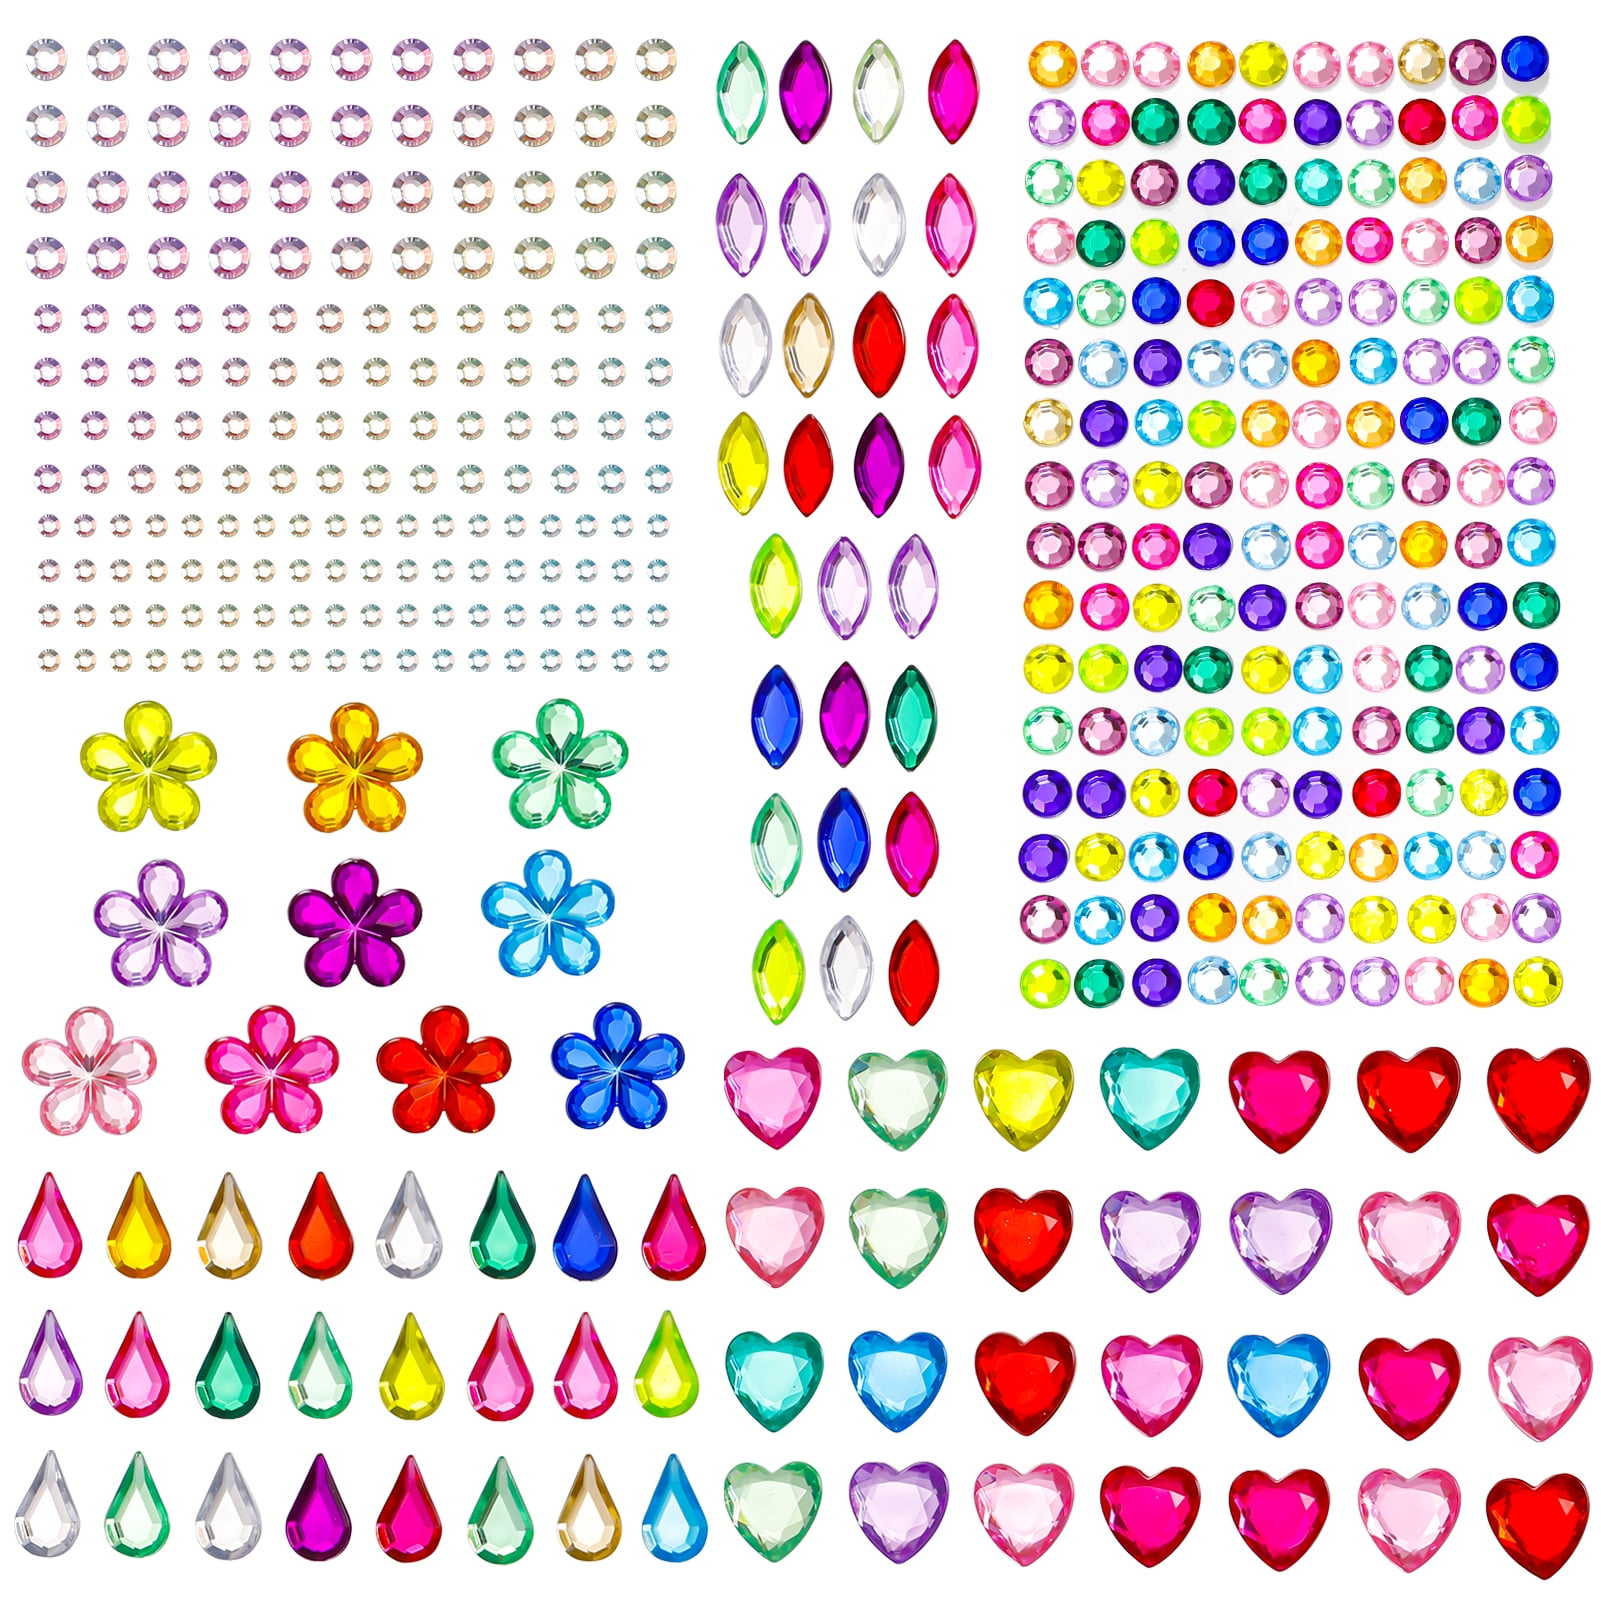 8 Sheets Gems Stickers Kids DIY Crafts Stickers Non-toxic Prime Acrylic  Rhinestone Sticker Gems Jewels Stickers for Kids  Crafts/Scrapbooking/Prize/Party Favor/Phone Decoration